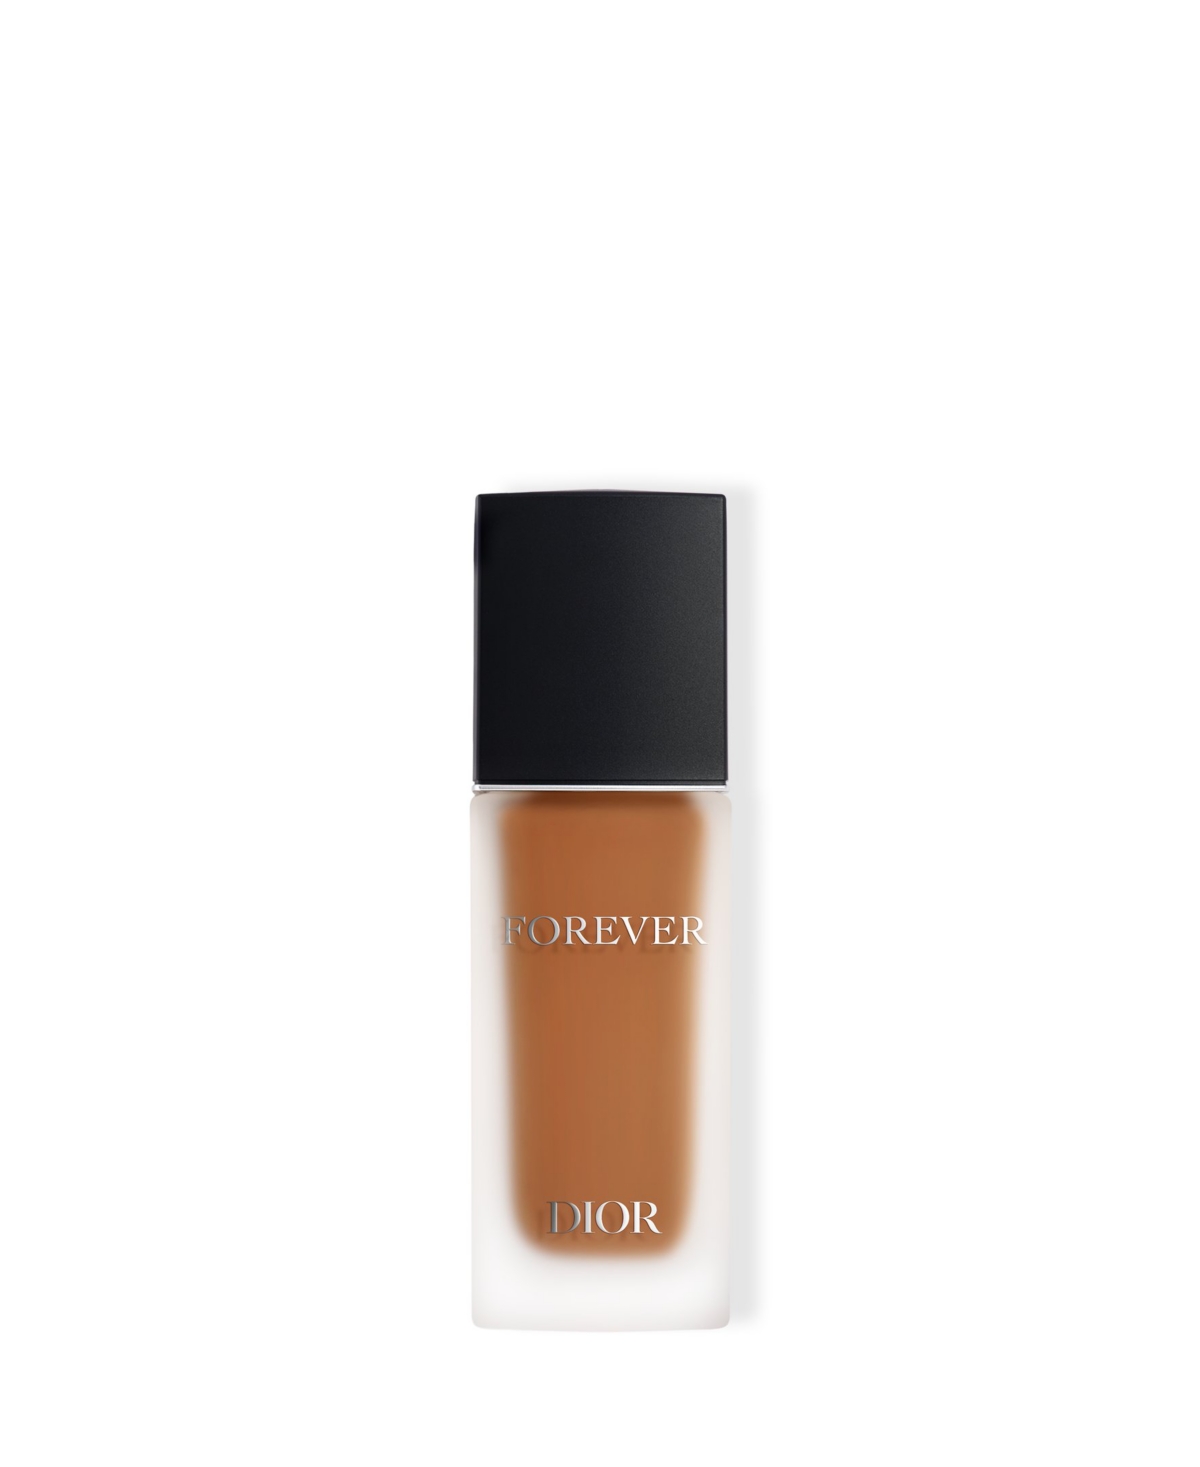 Dior Forever Matte Skincare Foundation Spf 15 In . Neutral (medium To Deep Skin With Neut